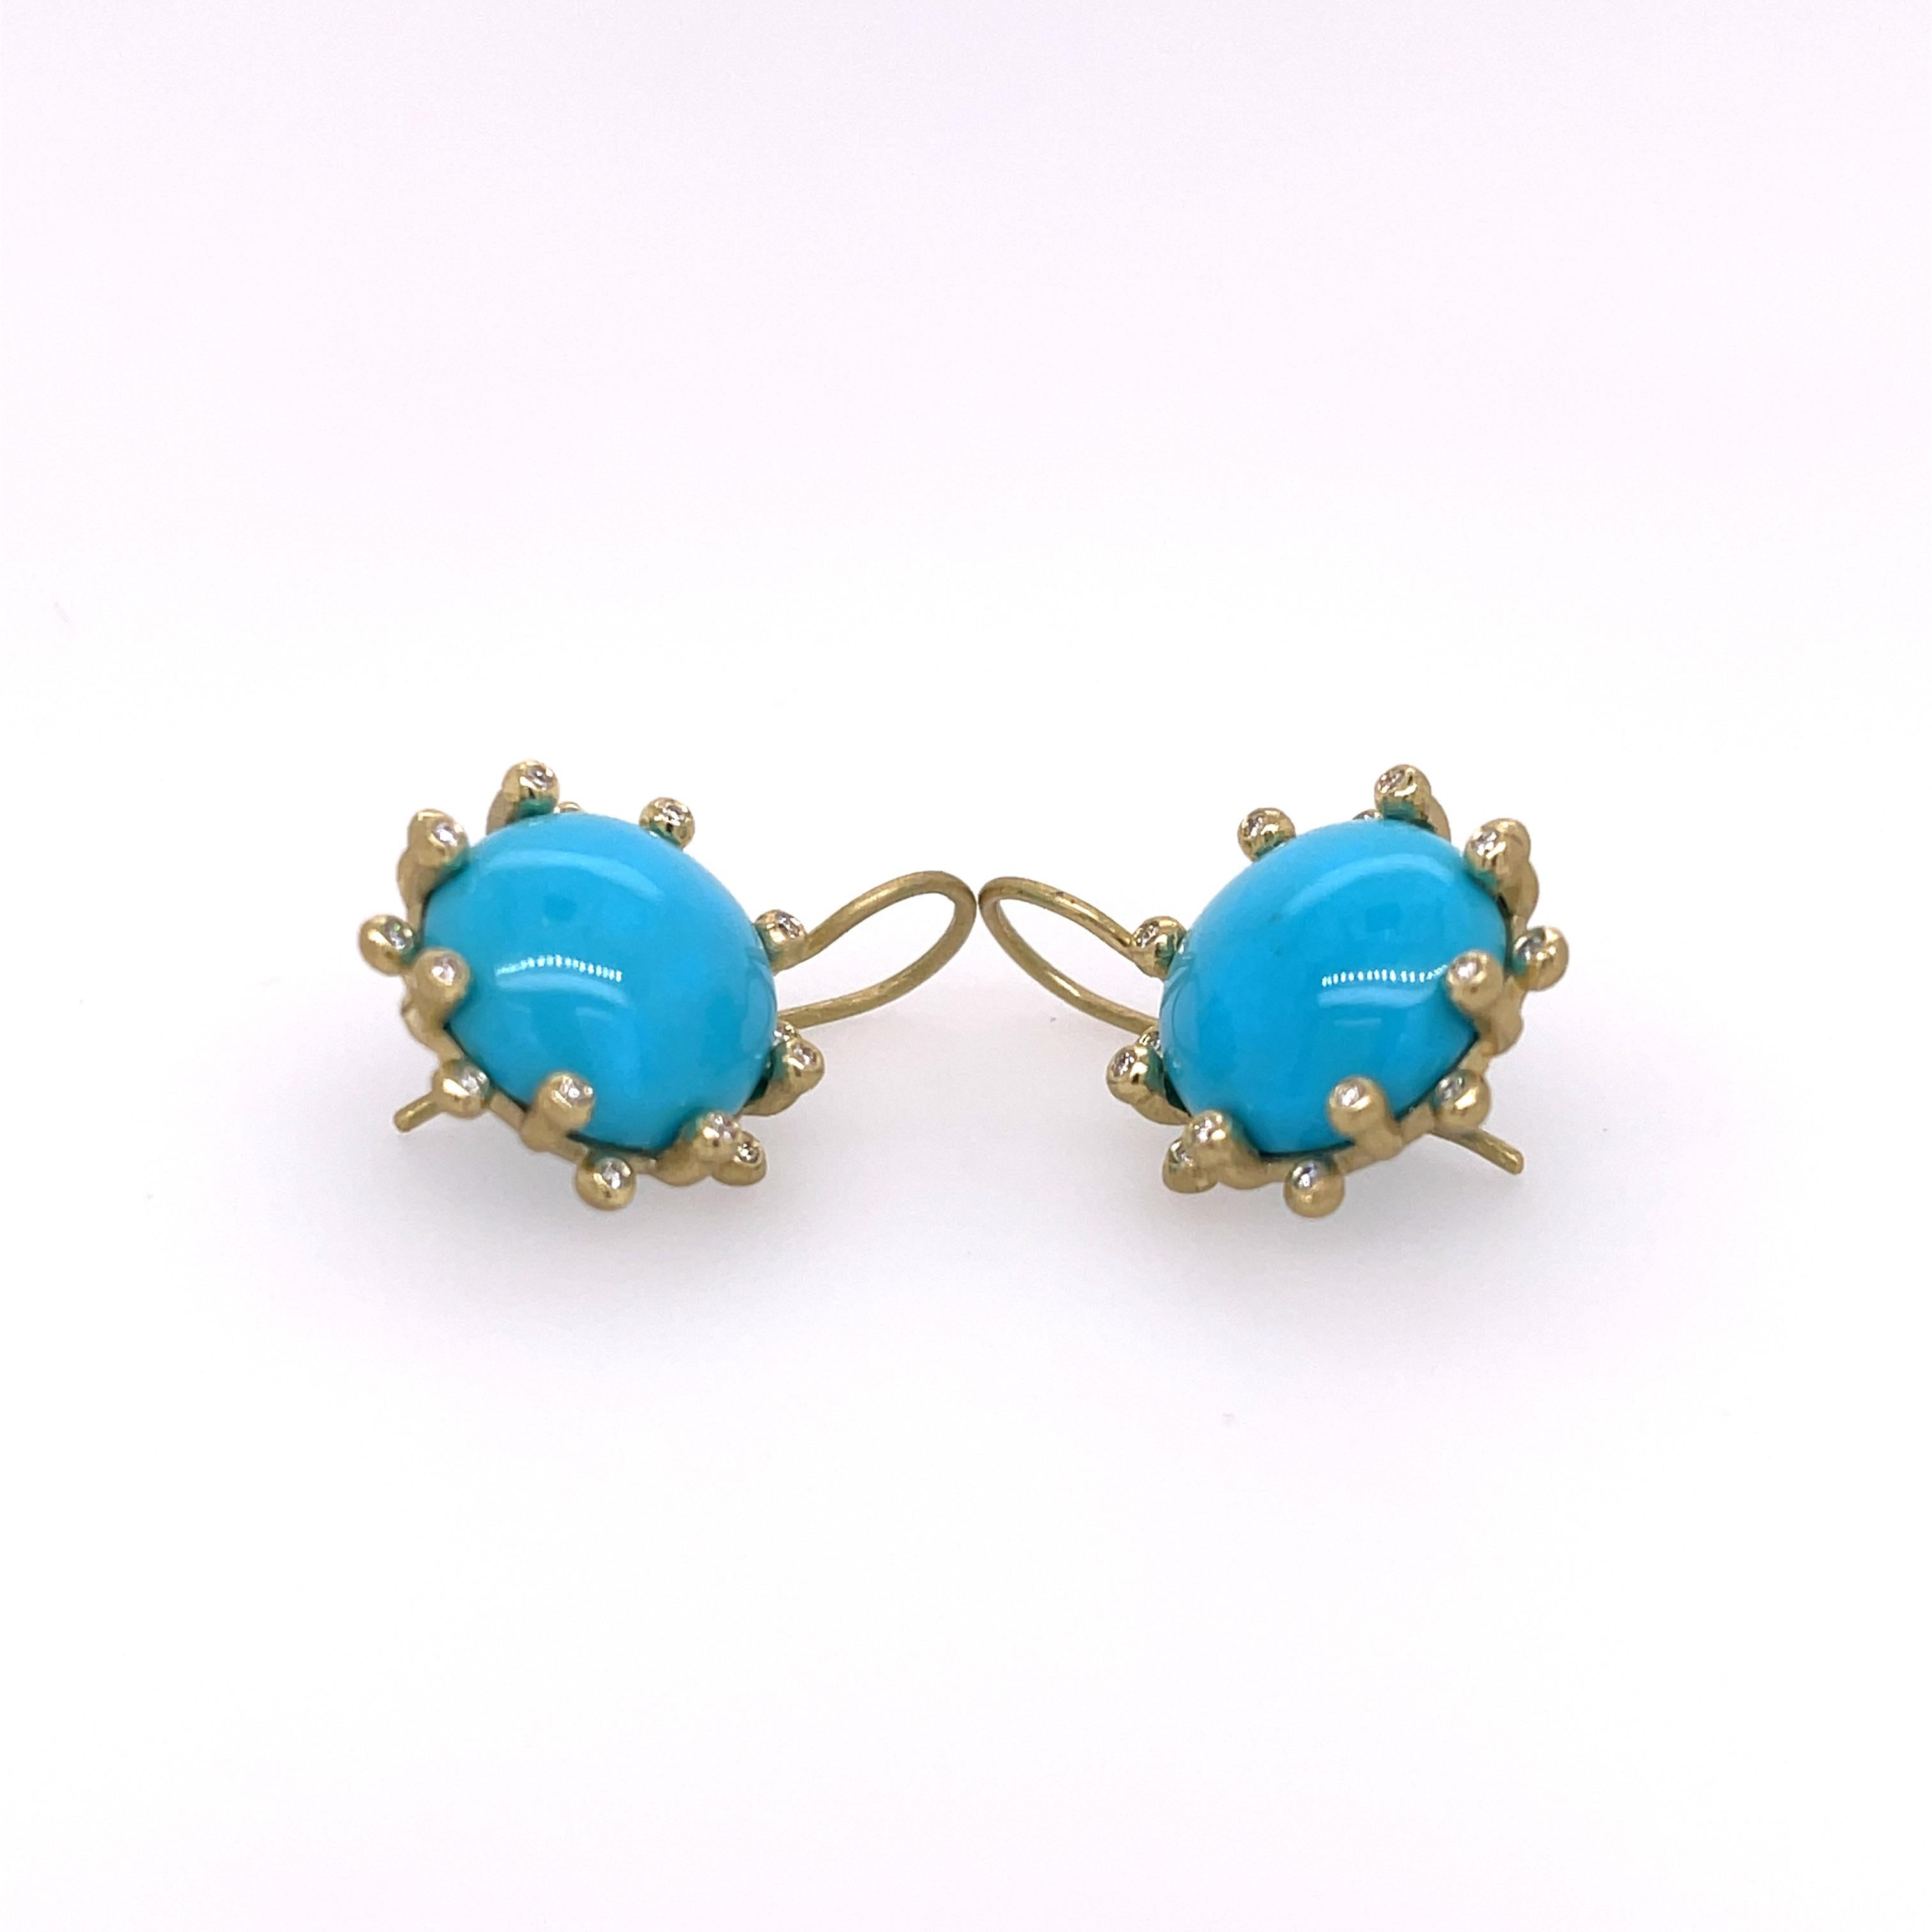 18K yellow gold earrings featuring sleeping beauty turquoise and brilliant round diamonds by designer Suzy Landa. Turquoise 9.73ctw and Diamonds 0.16ctw. Handcrafted in New York City. Stamped Suzy Landa 750.

7/8